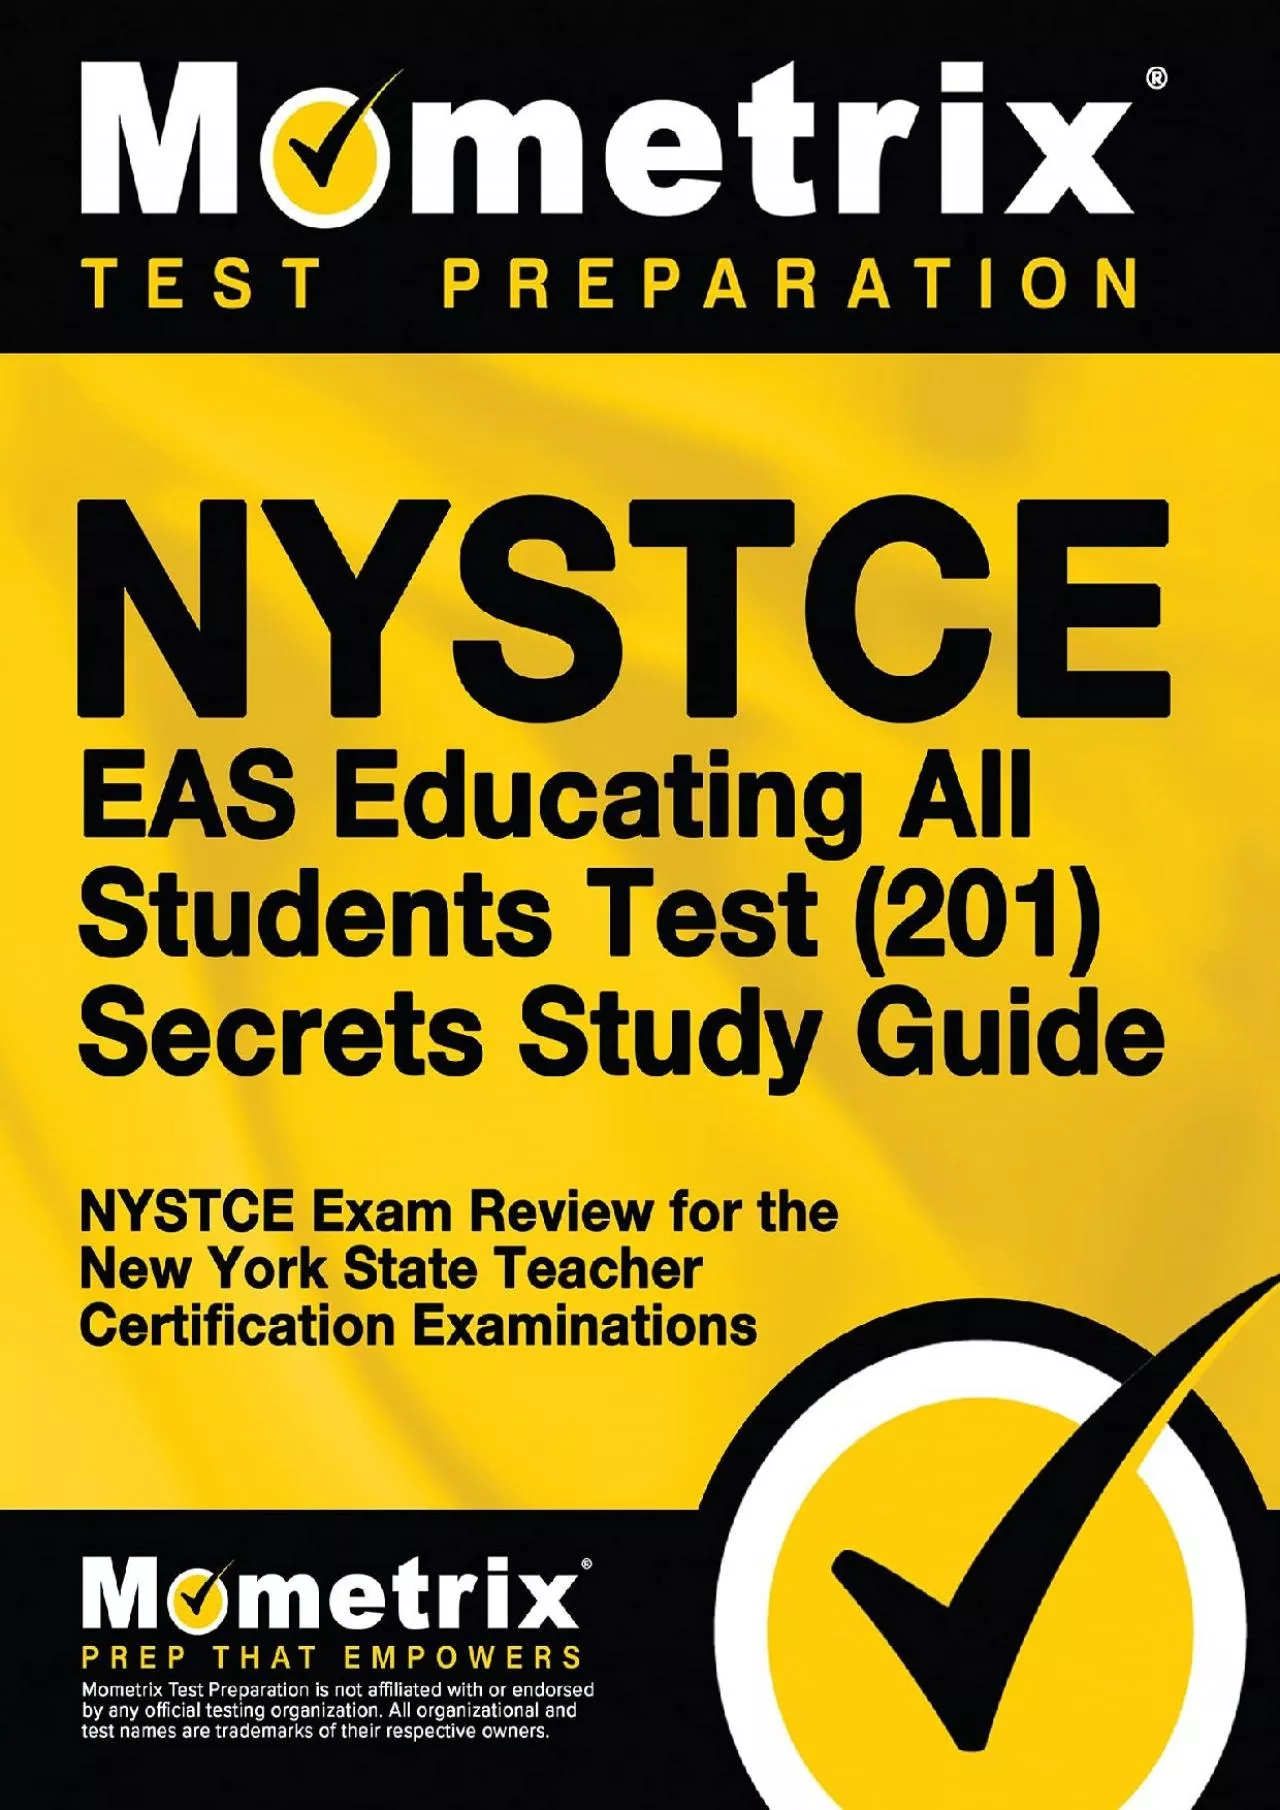 [DOWNLOAD] NYSTCE EAS Educating All Students Test 201 Secrets Study Guide: NYSTCE Exam